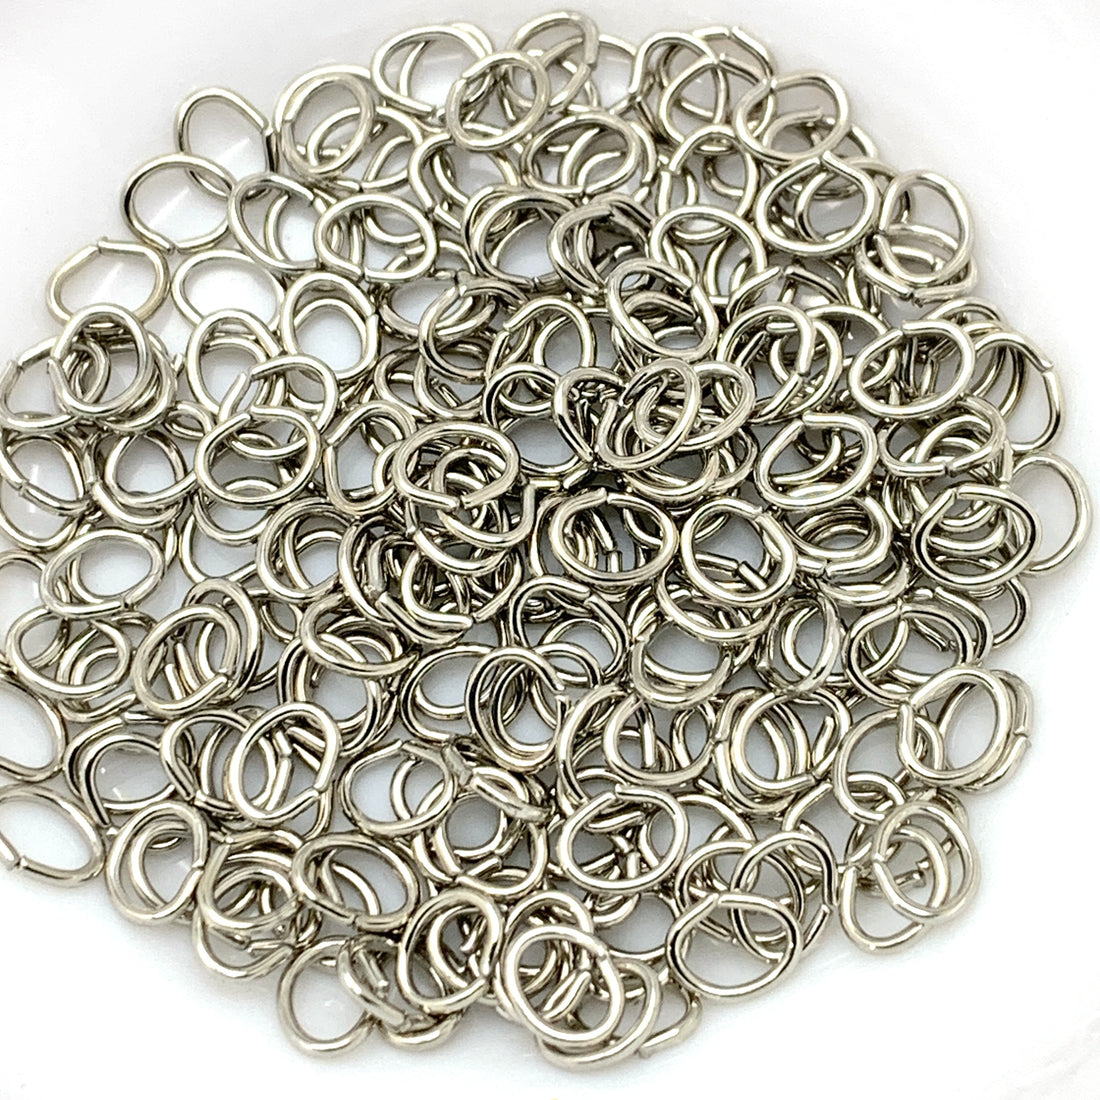 10 Pcs Bag of 5.3x3.5 mm 22g Silver Oval Jump Rings